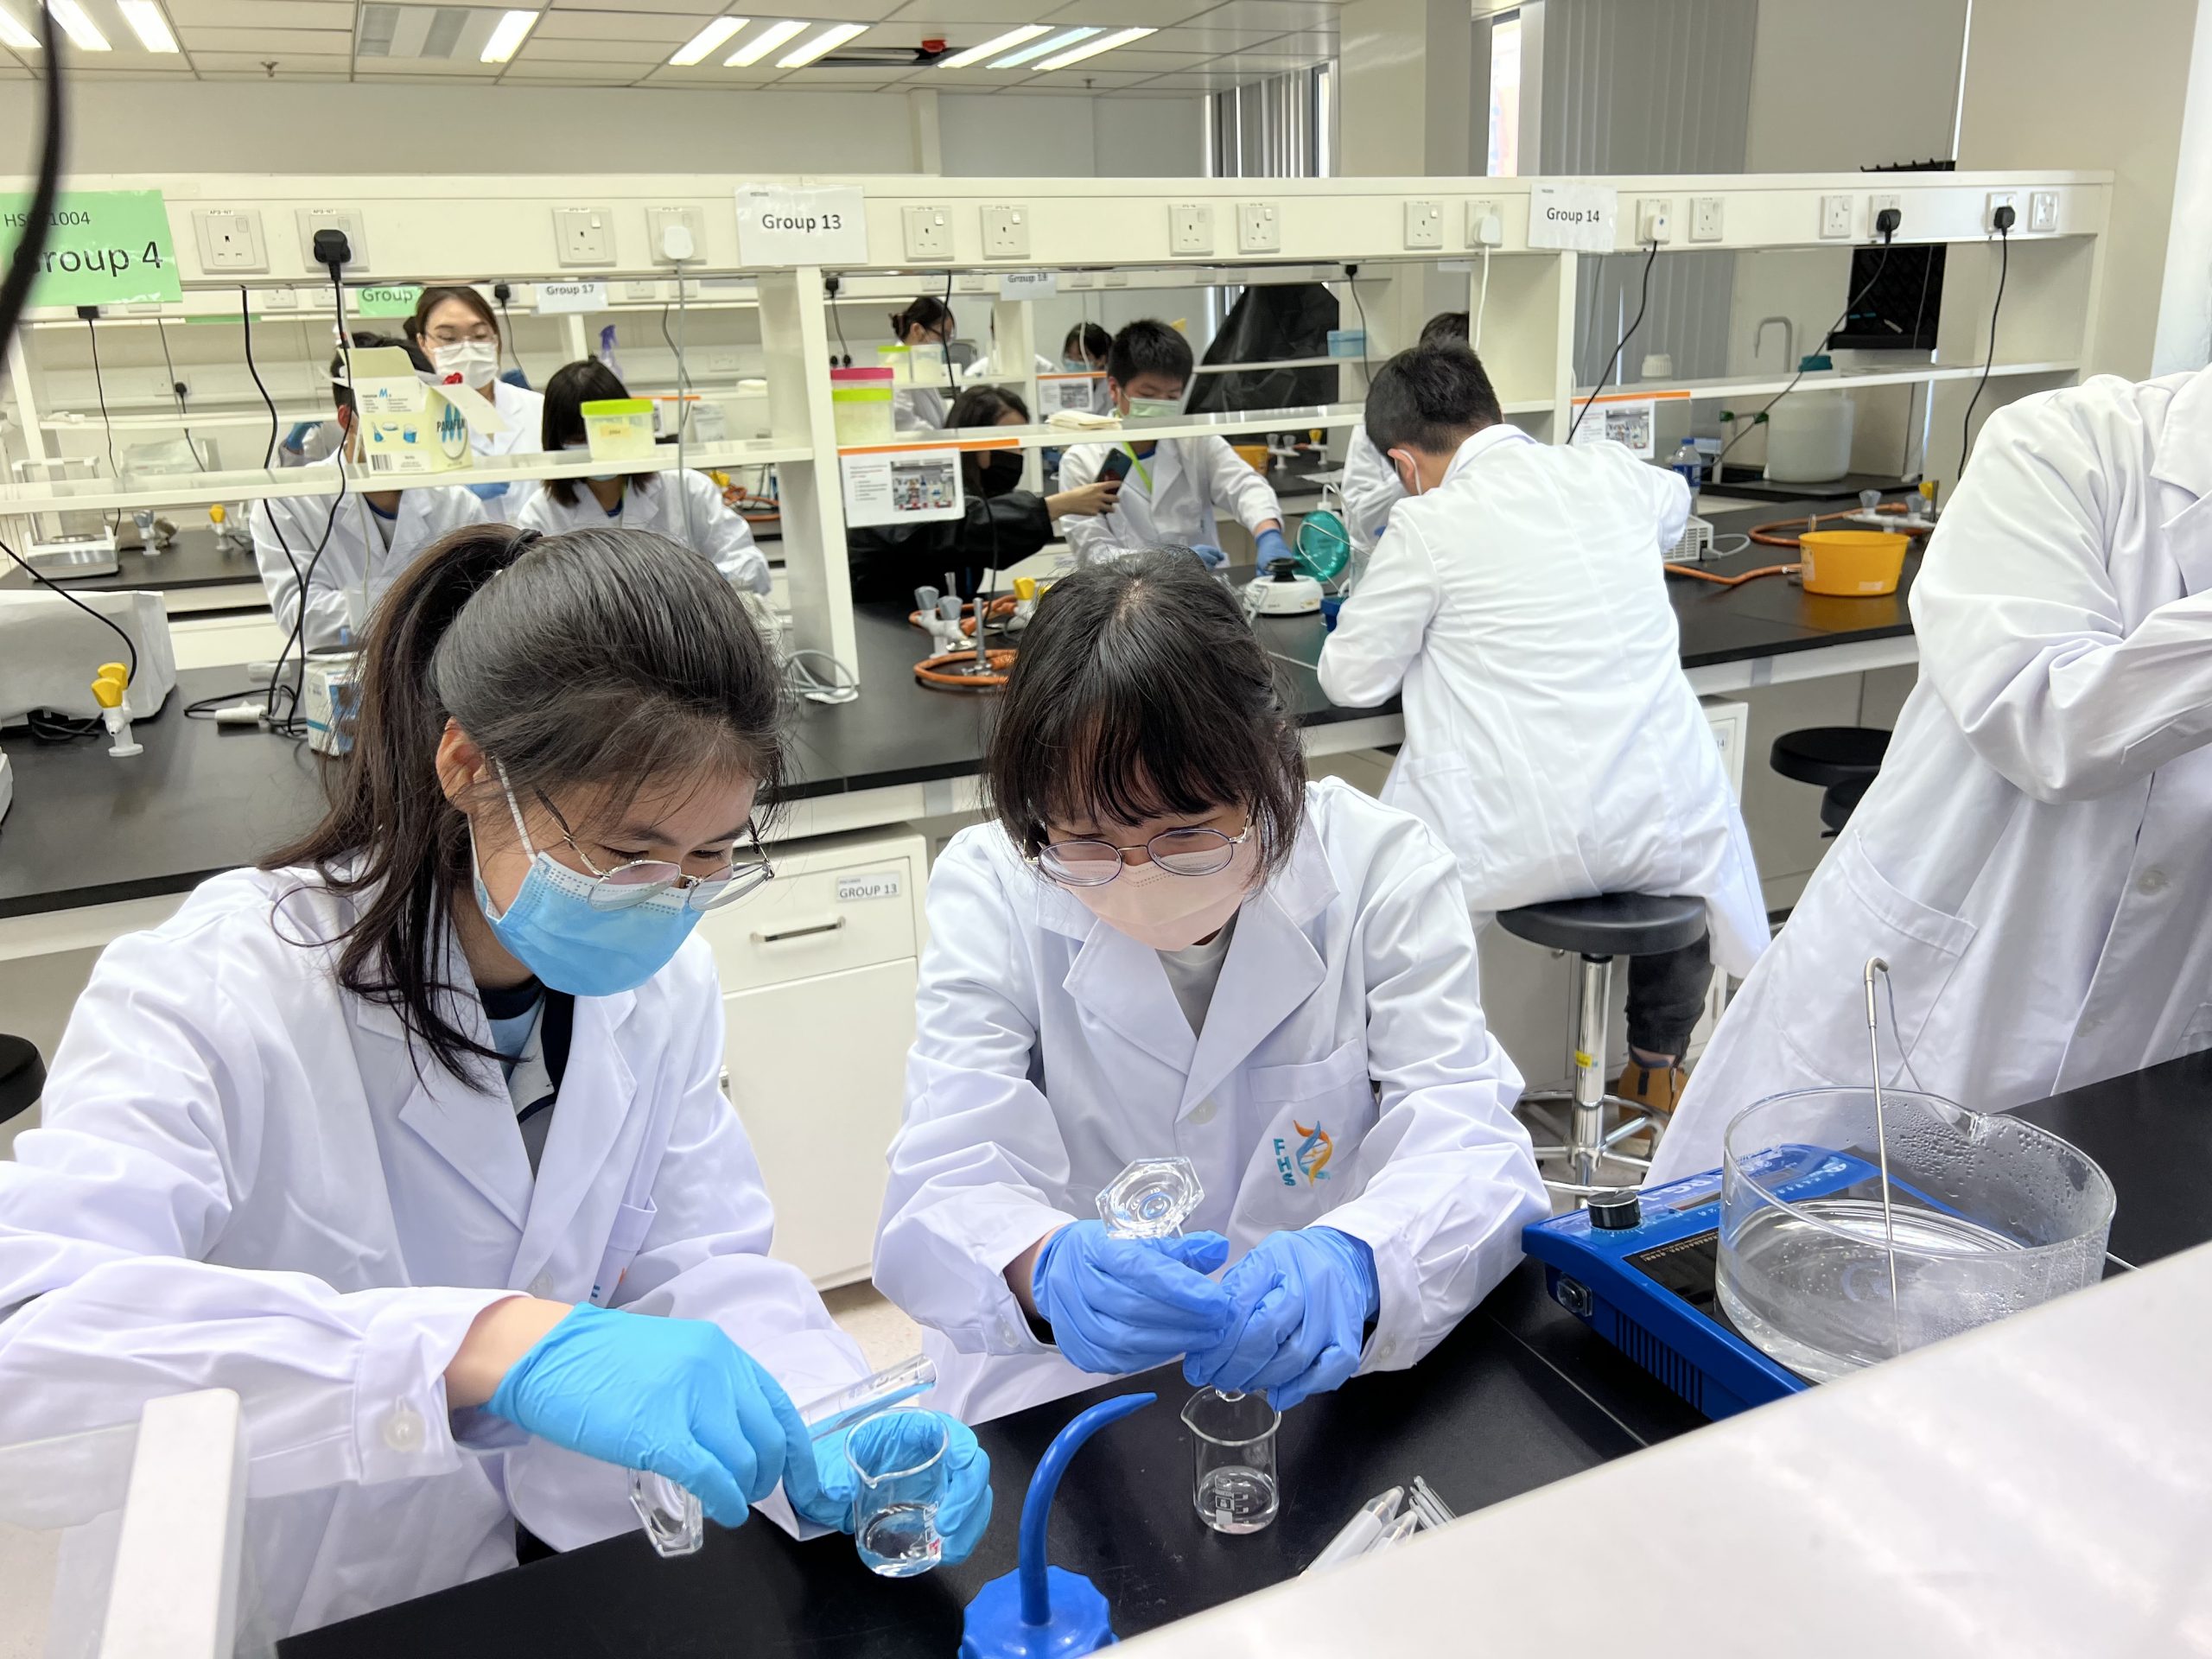 UM FHS organises field trip to inspire secondary students’ interest in scientific research